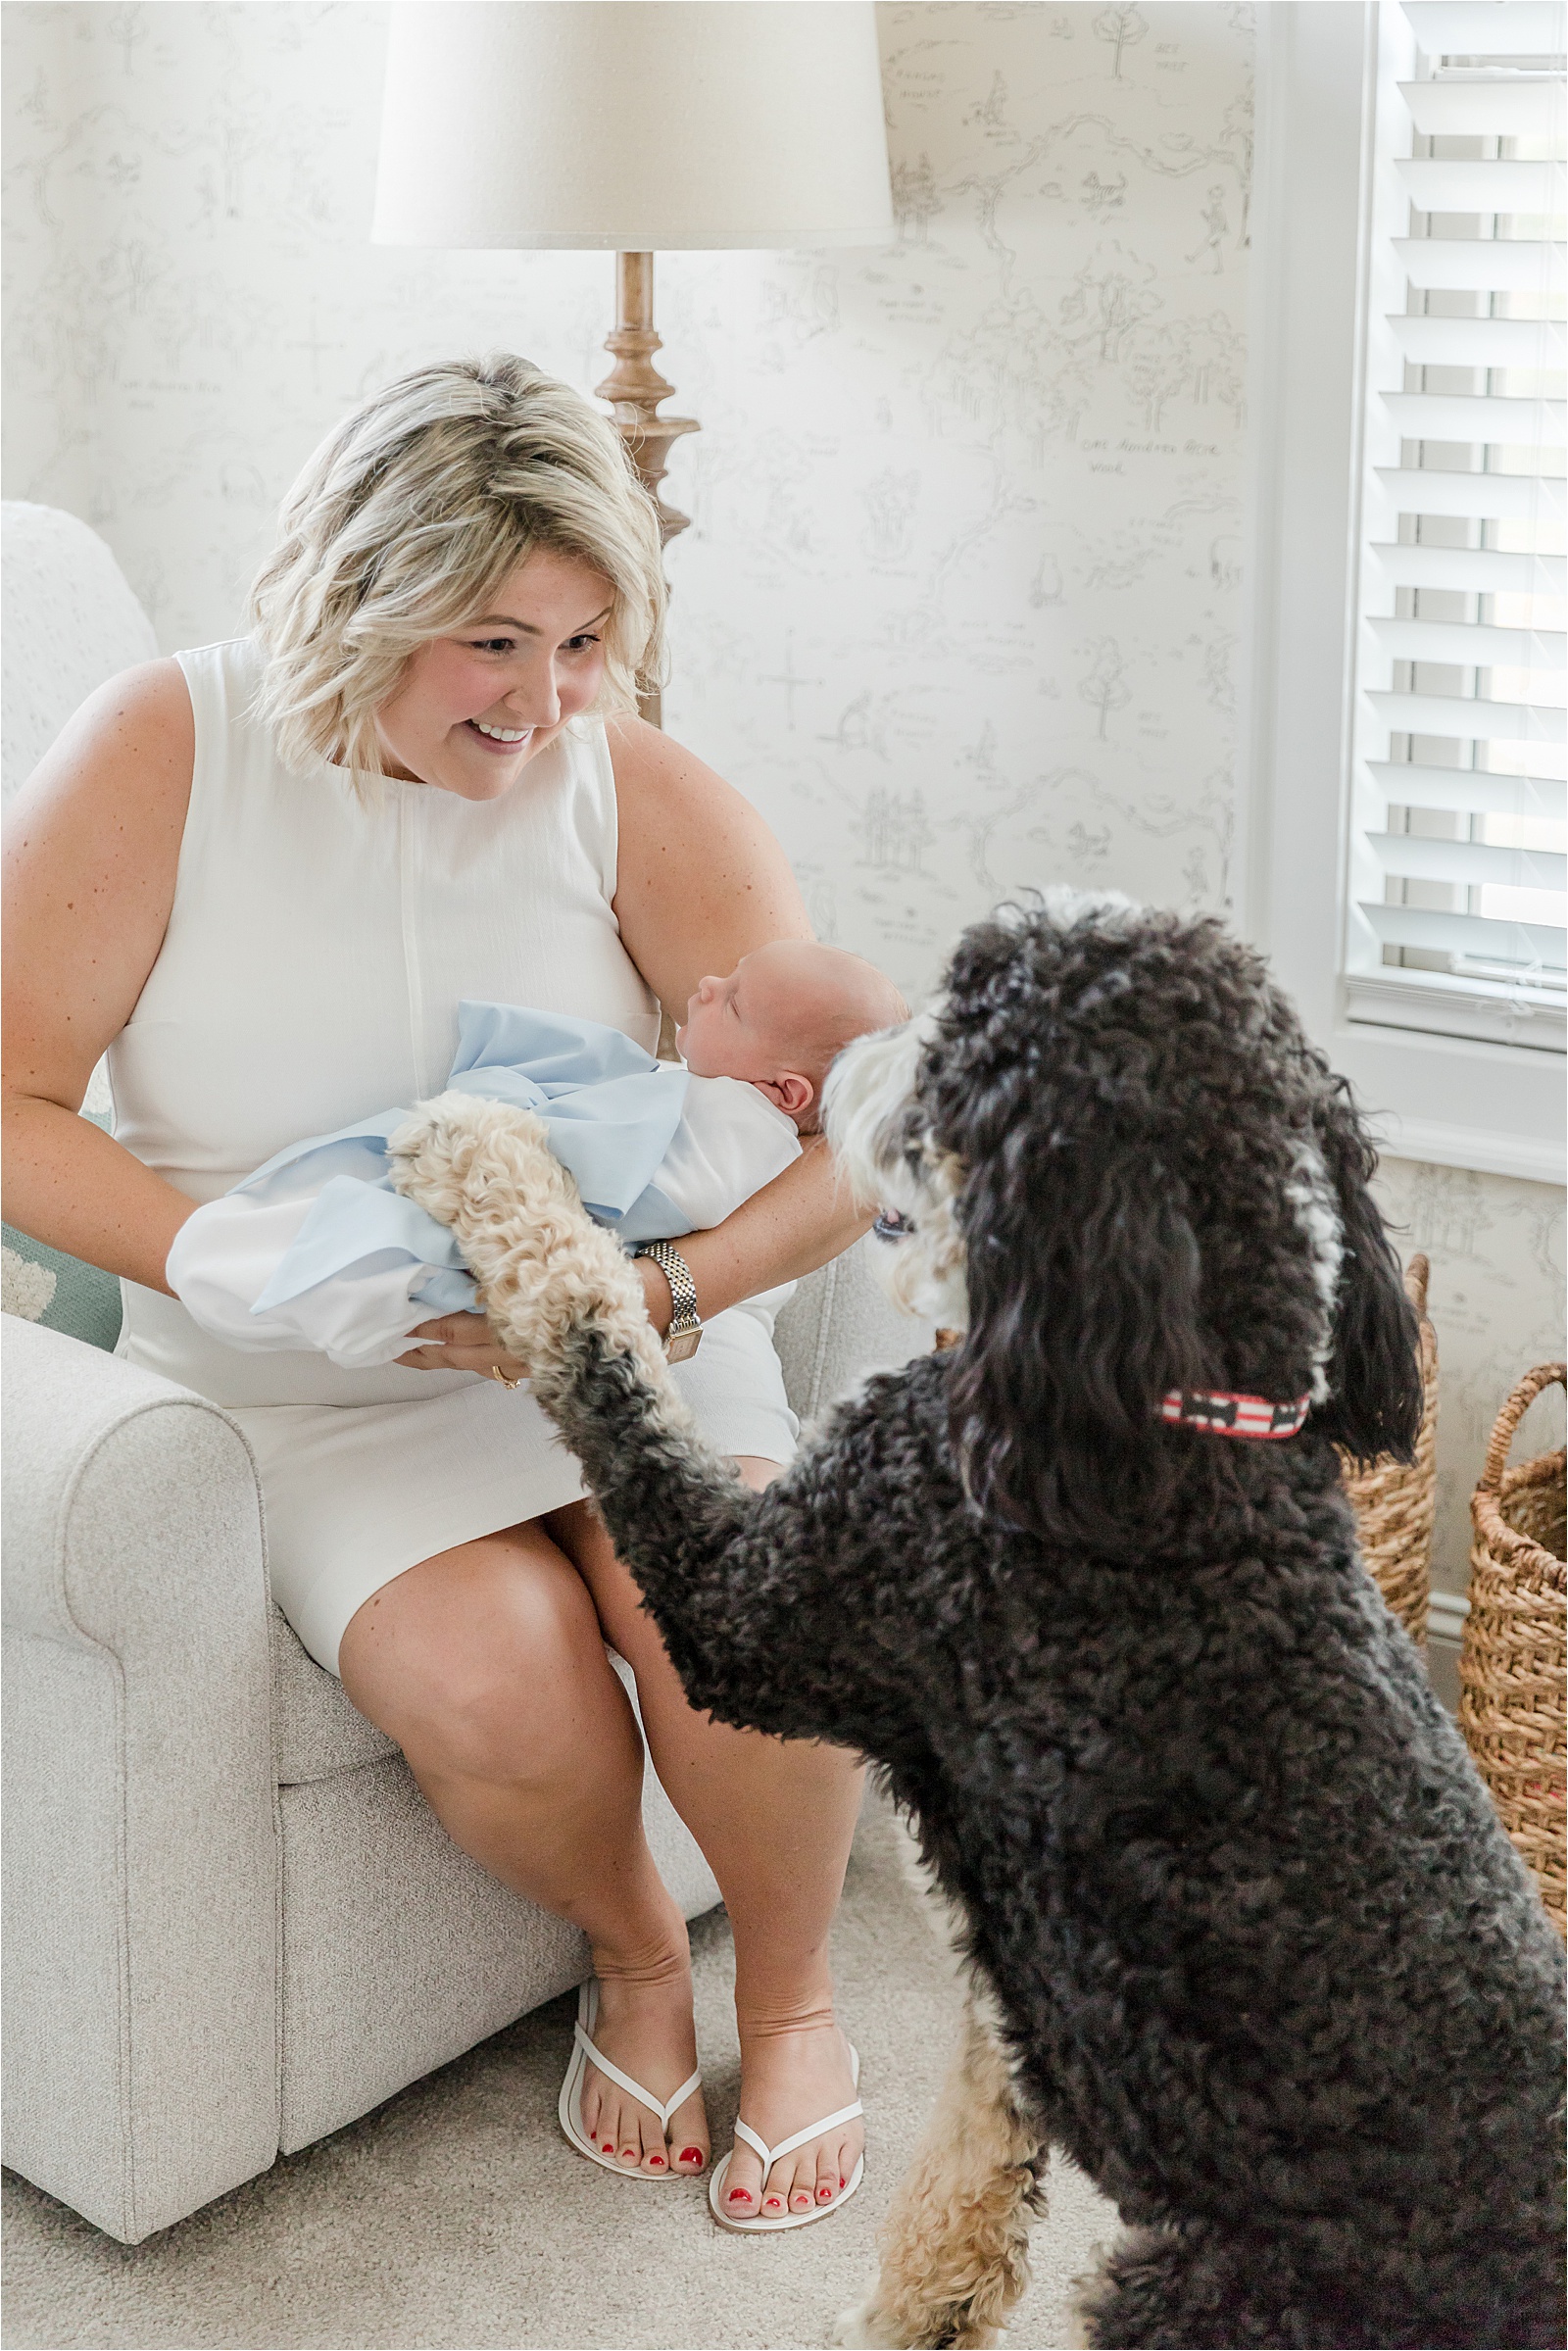 Mom holding newborn son as dog rests his paw on baby